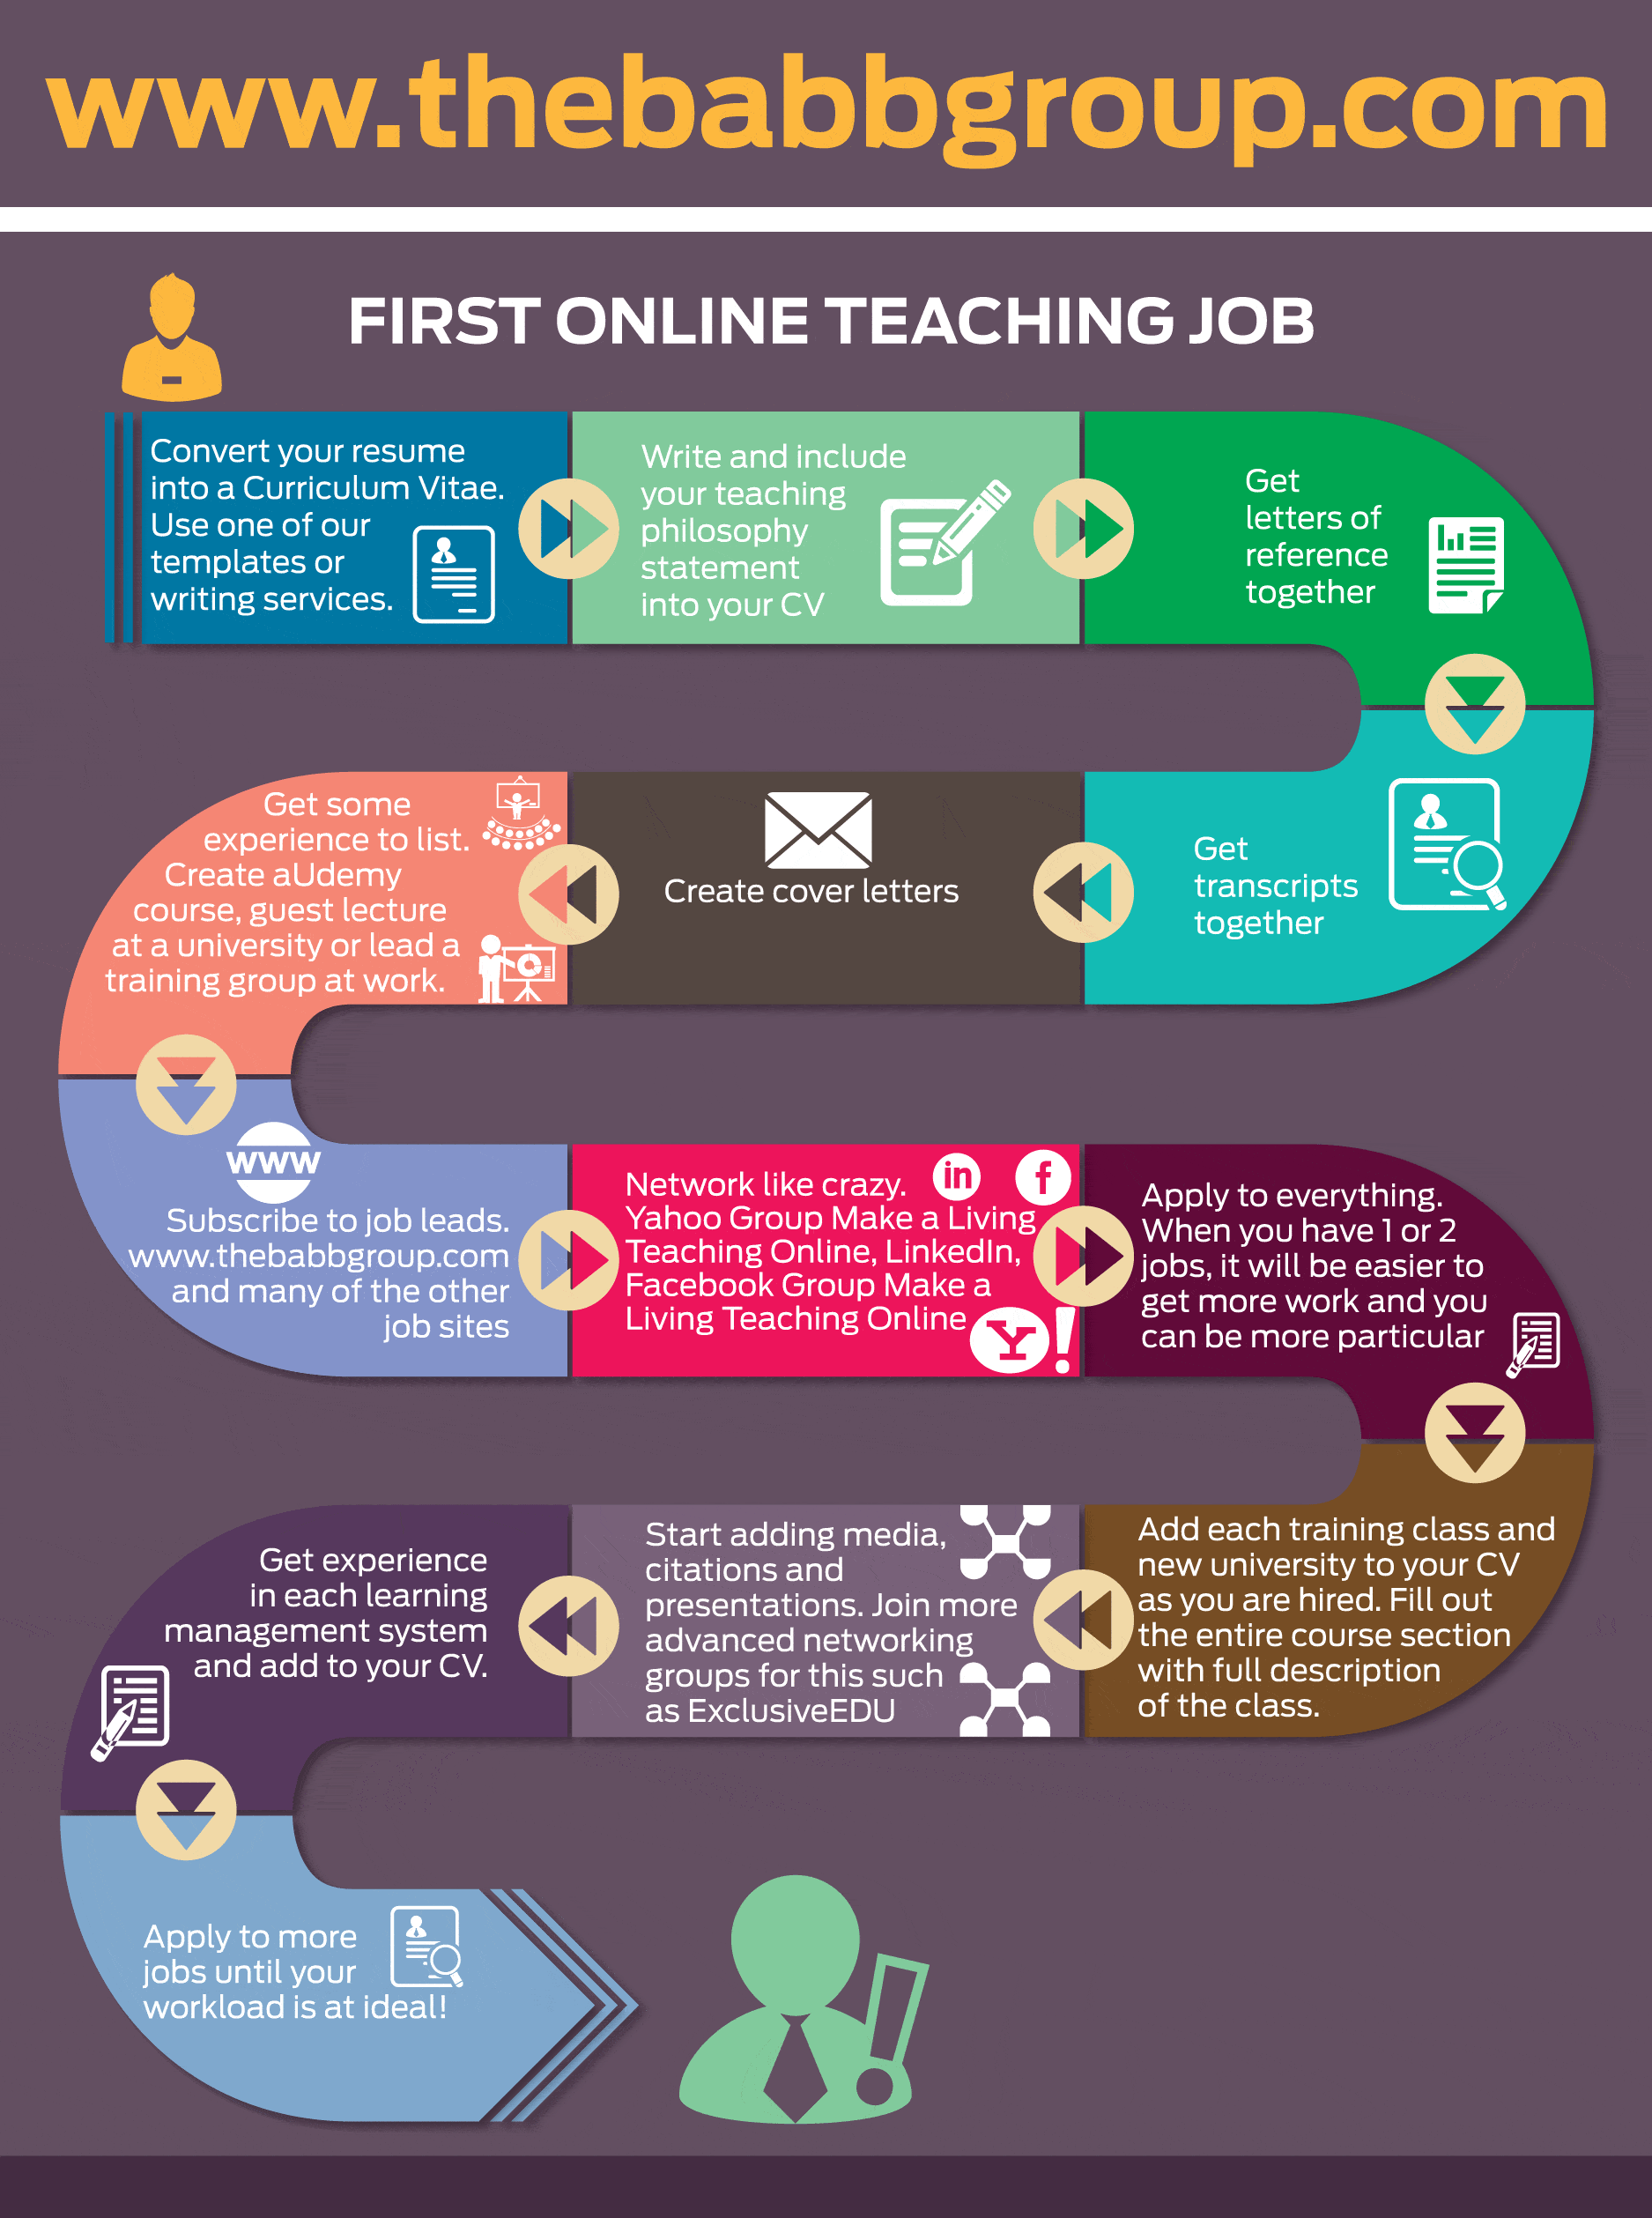 The How to Get Your First Online Teaching Job Infographic shows the ...